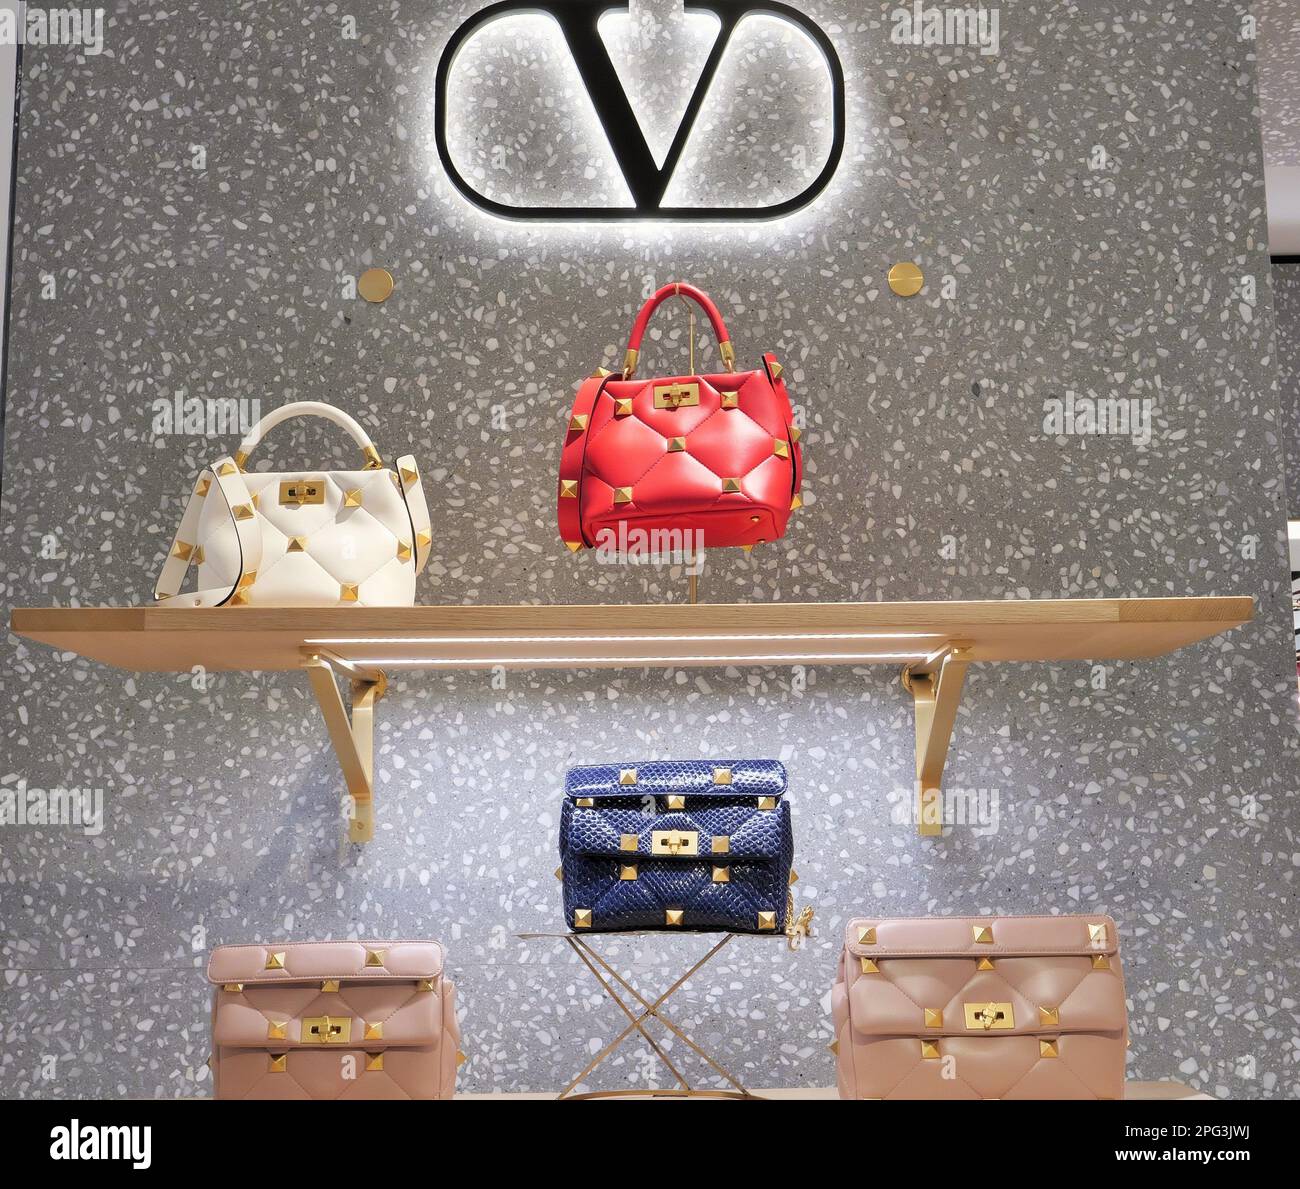 VALENTINO BAGS FOR WOMEN INSIDE THE FASHION STORE Stock Photo - Alamy